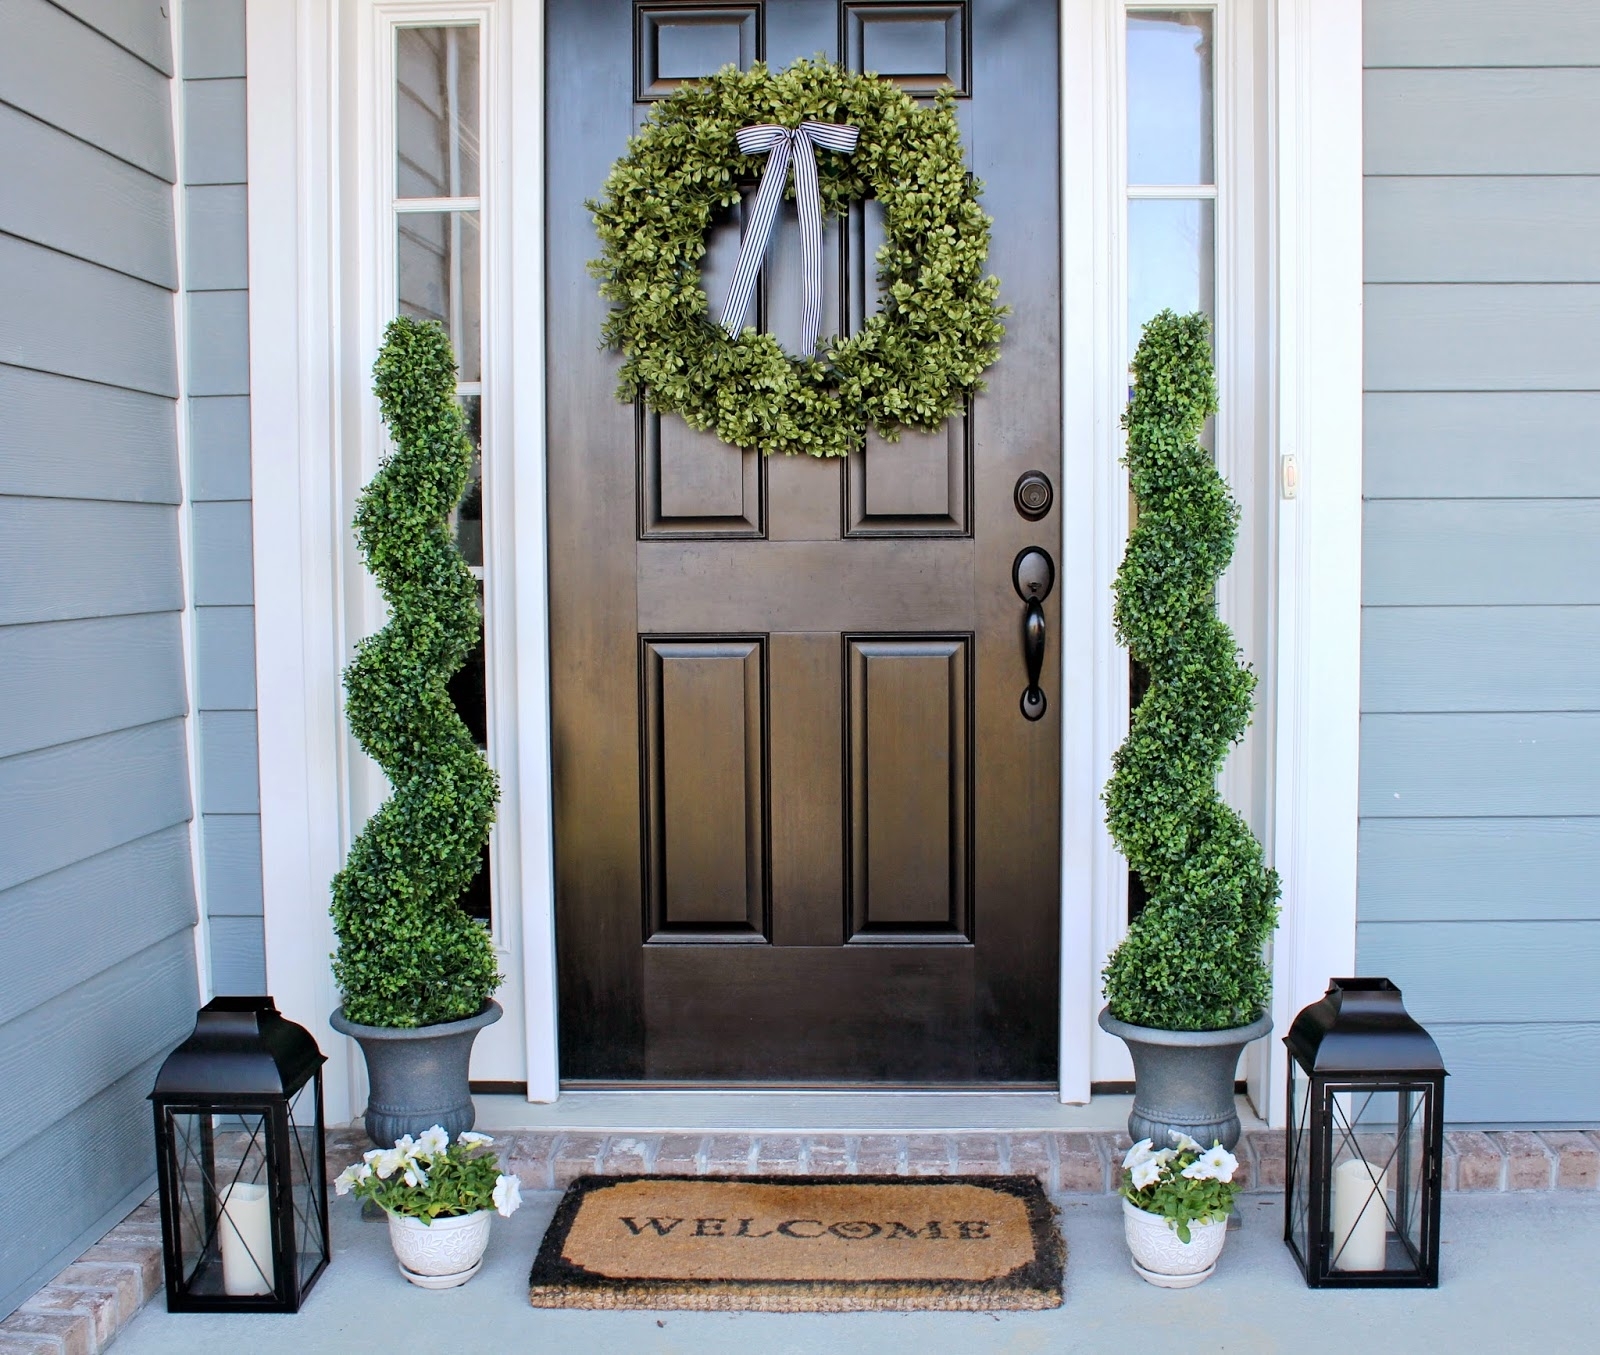 Elegant Topiary Trees For Front Porch.